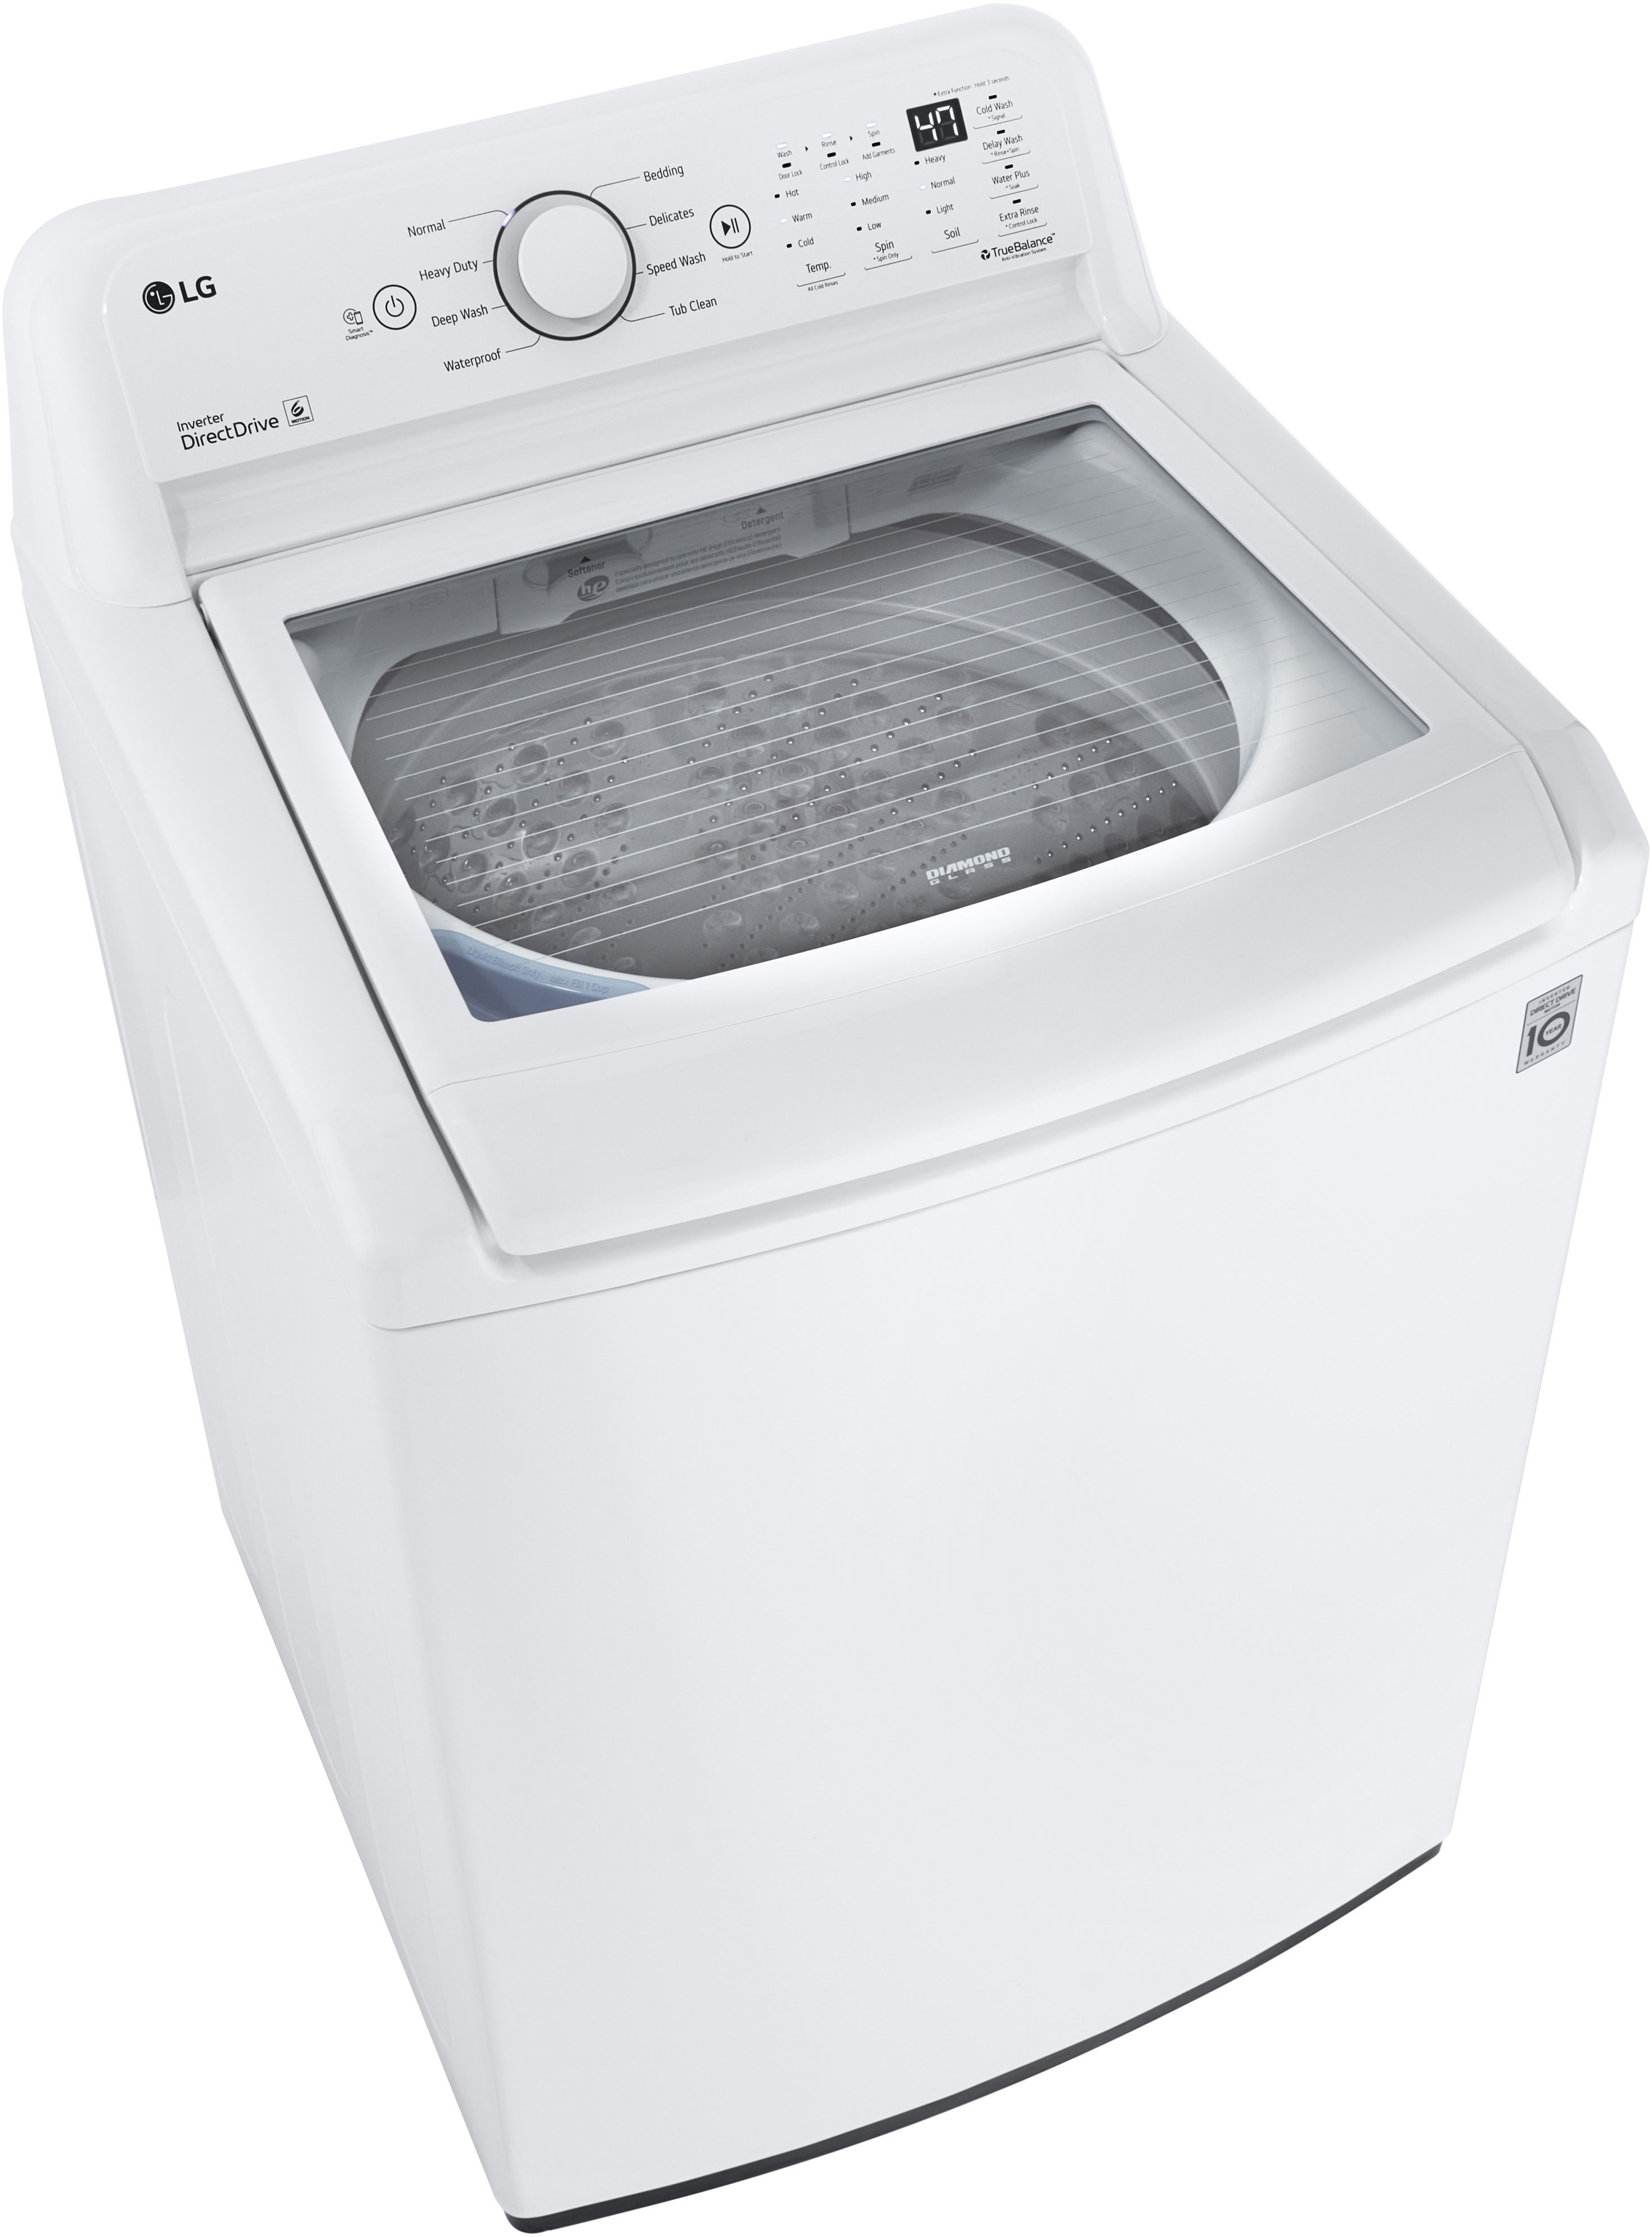 WT7000CW by LG - 4.5 cu. ft. Ultra Large Capacity Top Load Washer